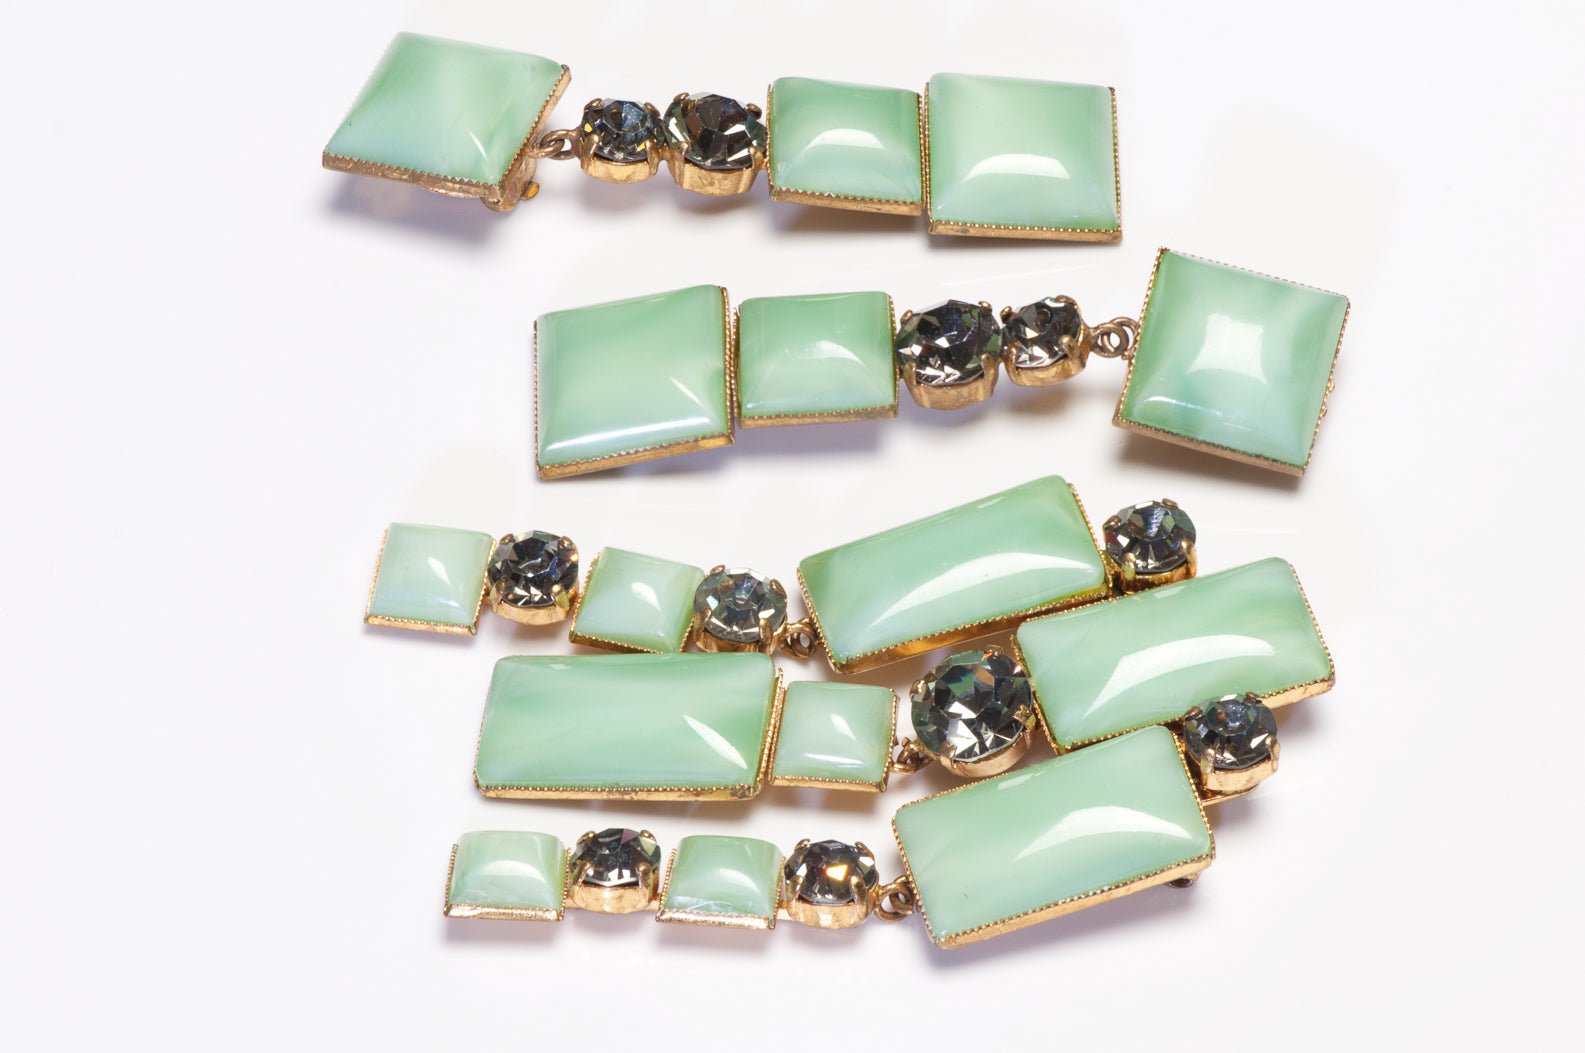 Pierre Cardin Couture 1950's Green Poured Glass Crystal Brooch Earrings Set